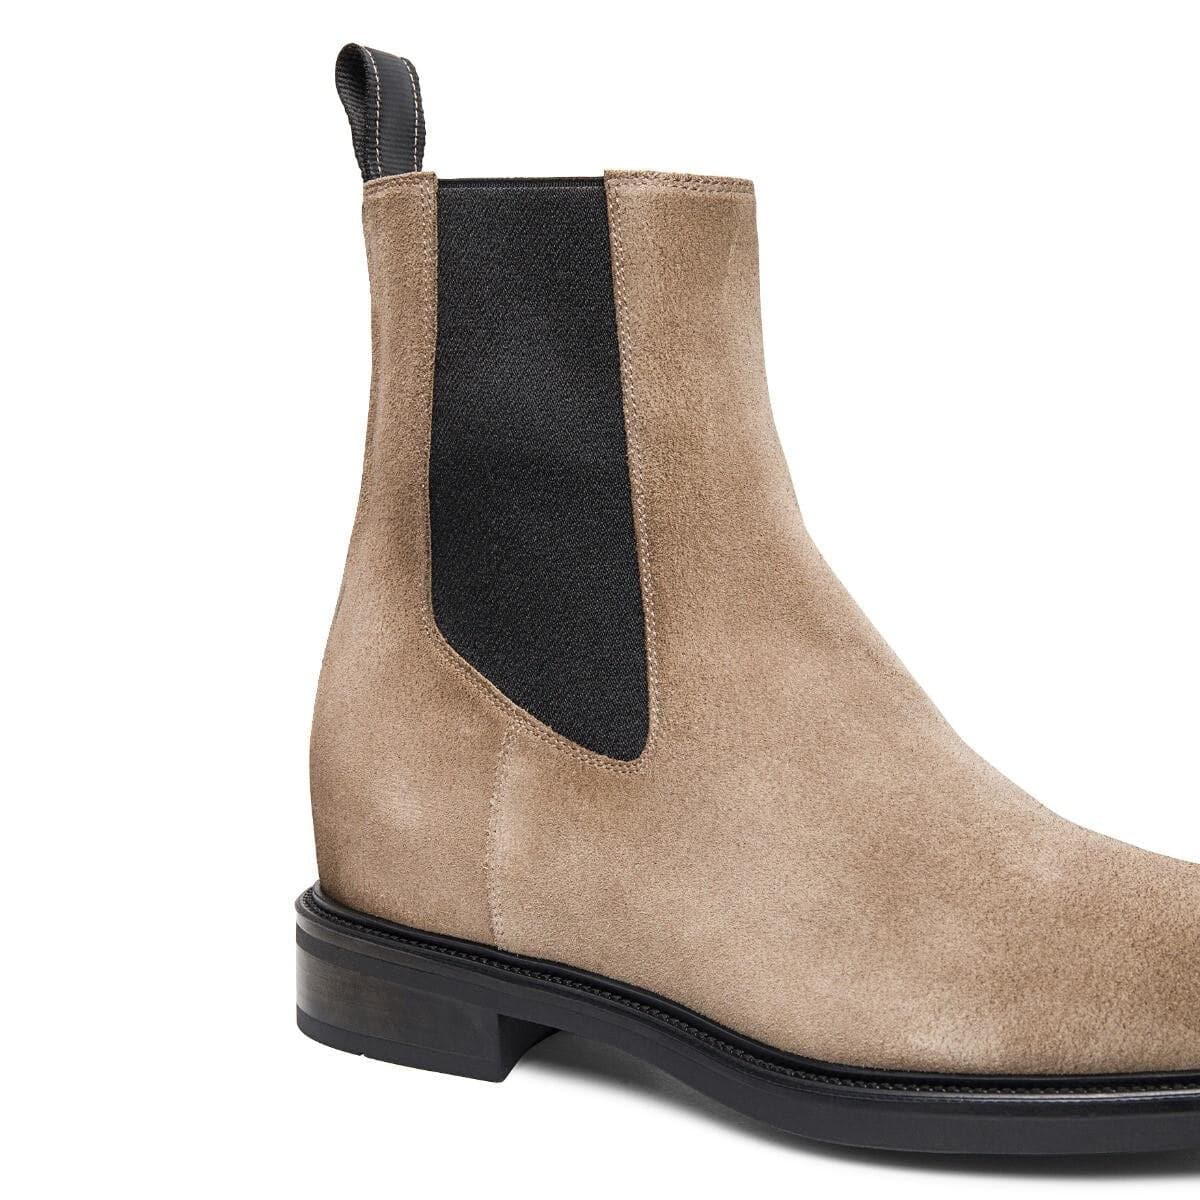 Beatles Women's Suede Ankle Boots - Taupe